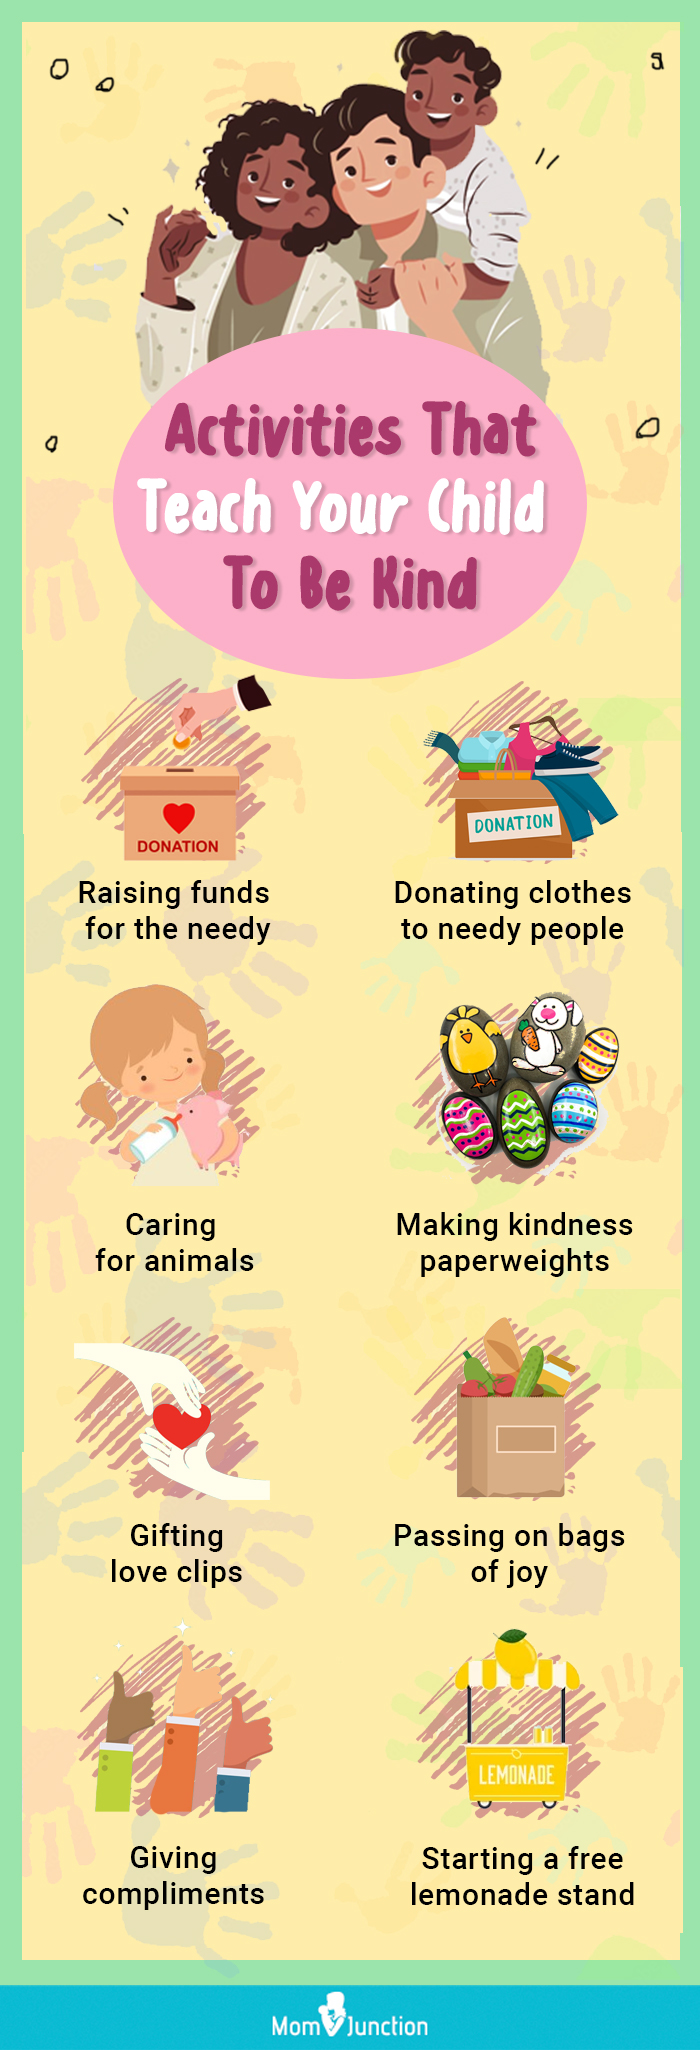 activities that teach your child to be kind [infographic]